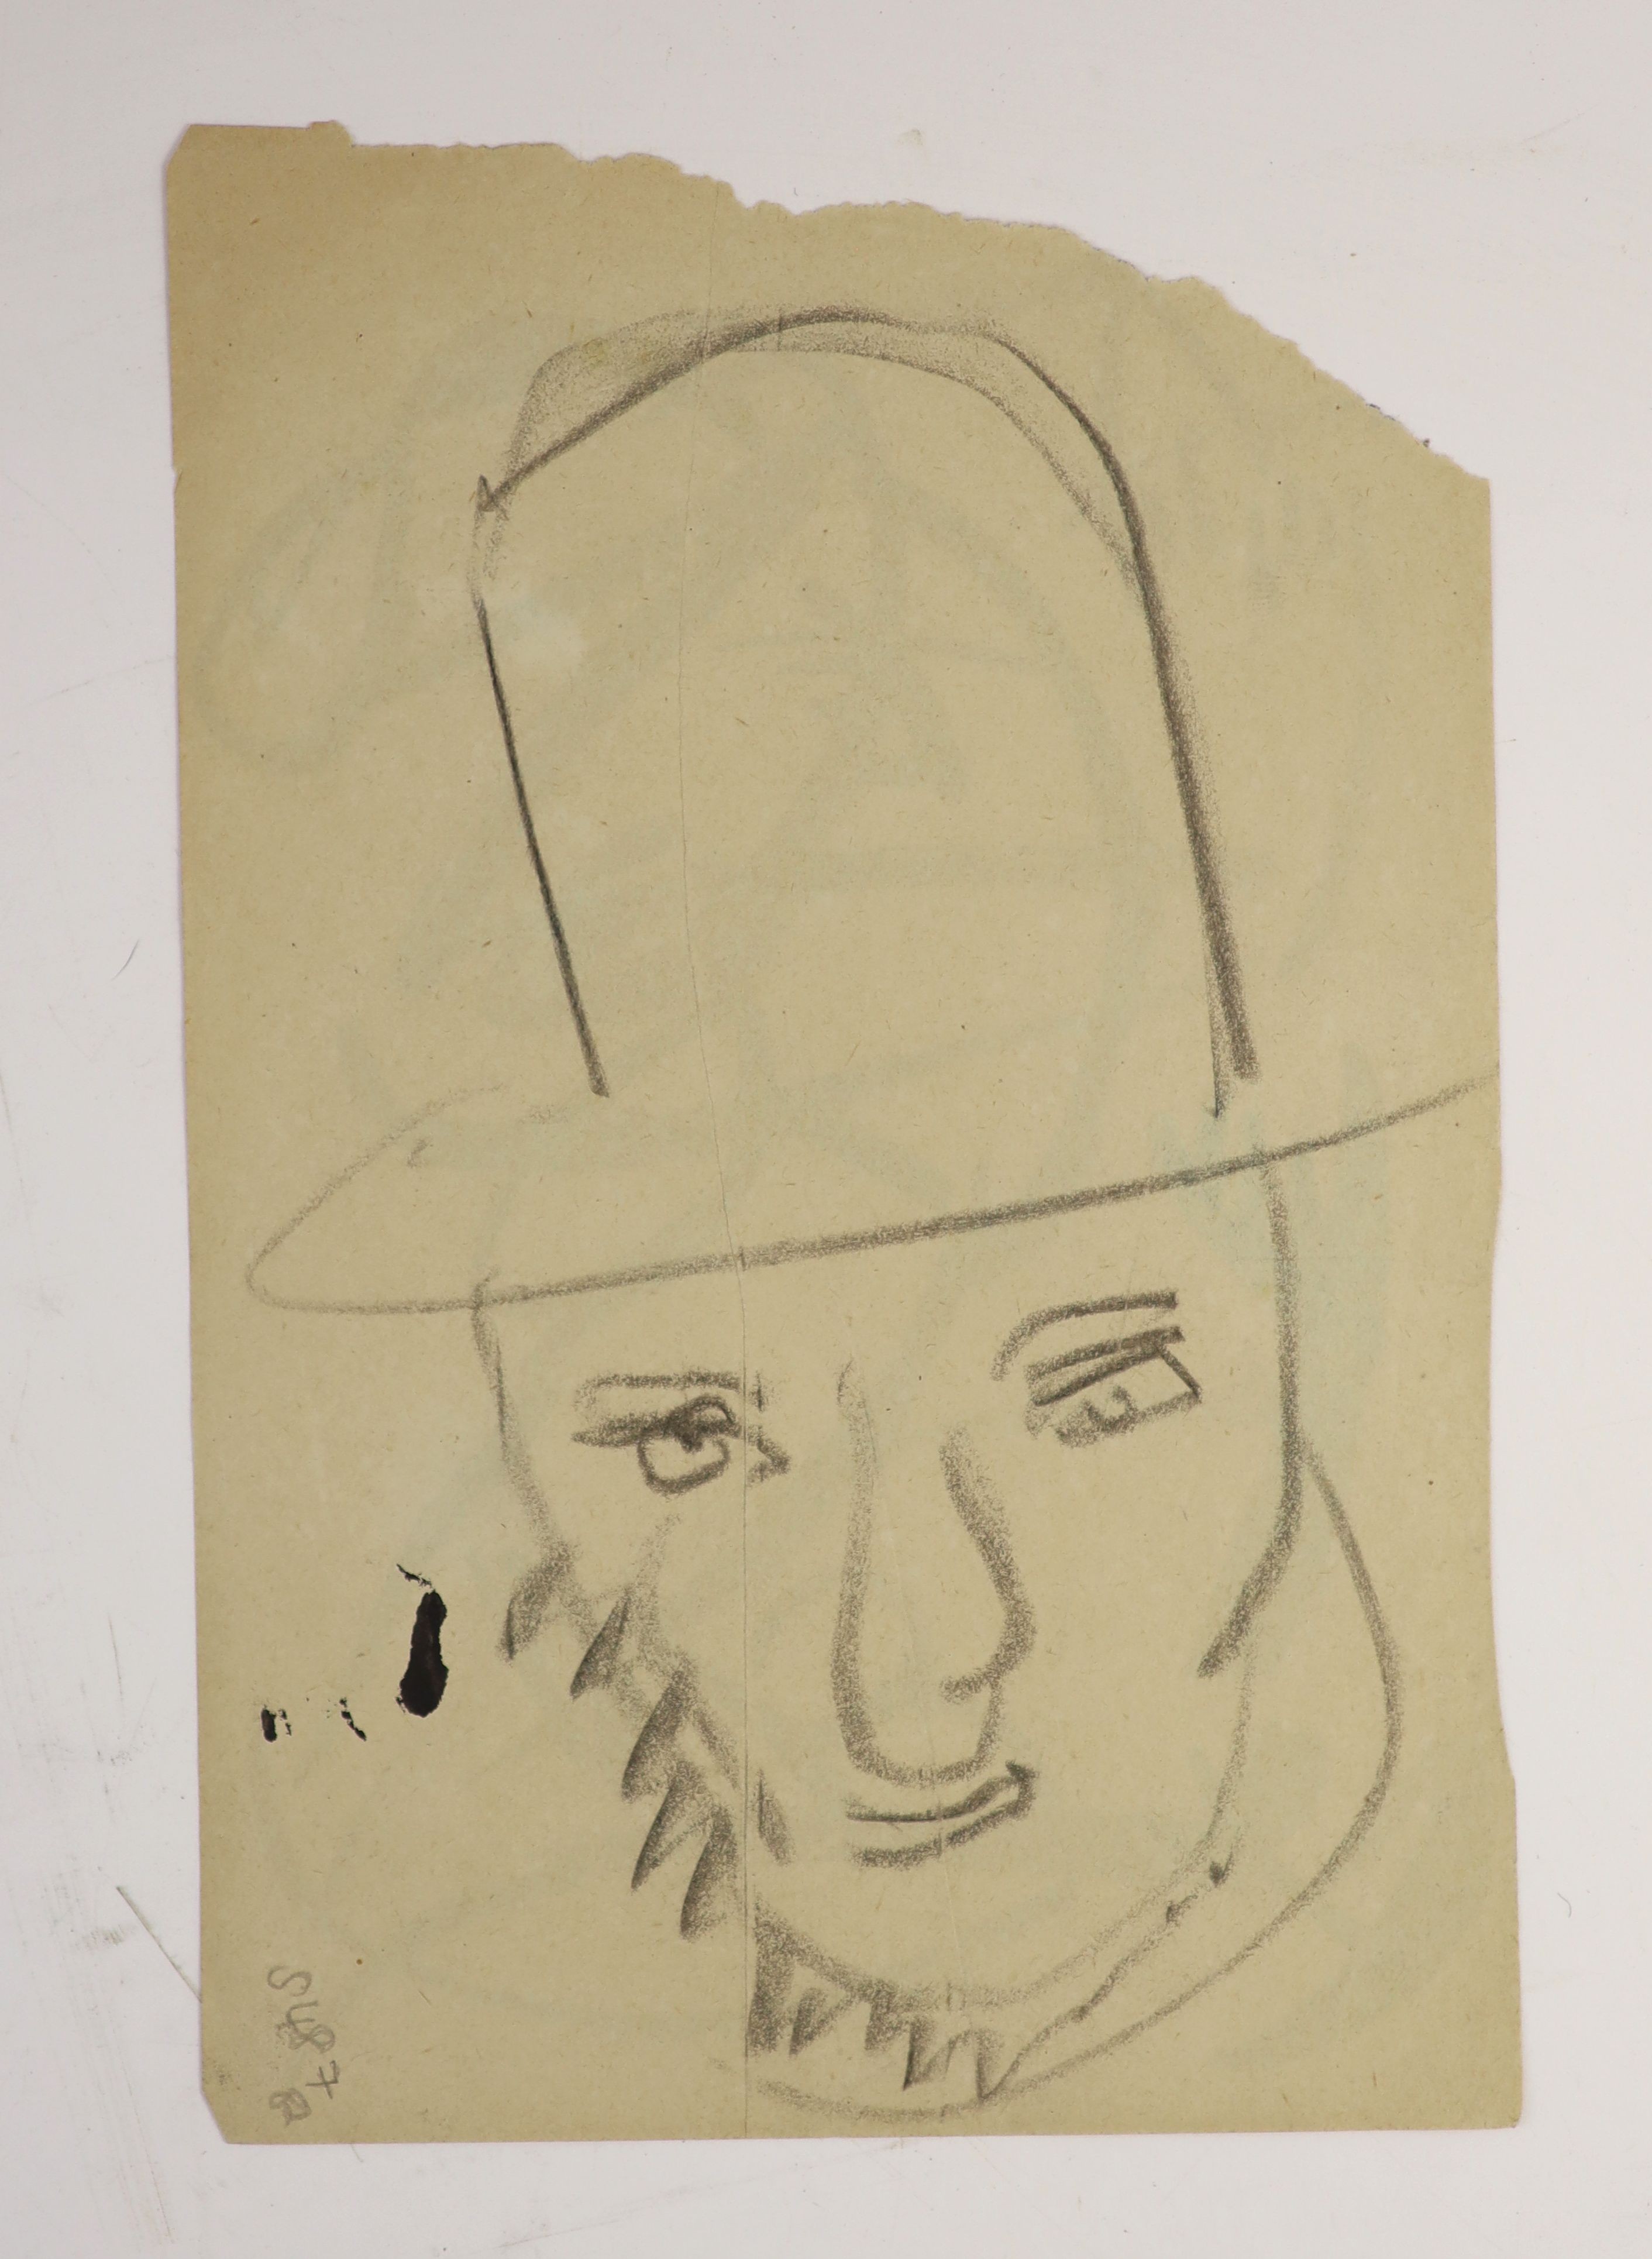 Henri Gaudier-Brzeska (1891-1915), Head of a man wearing a hat, an abstract sketch in ink, Charcoal on paper, 14 x 21cms., unframed